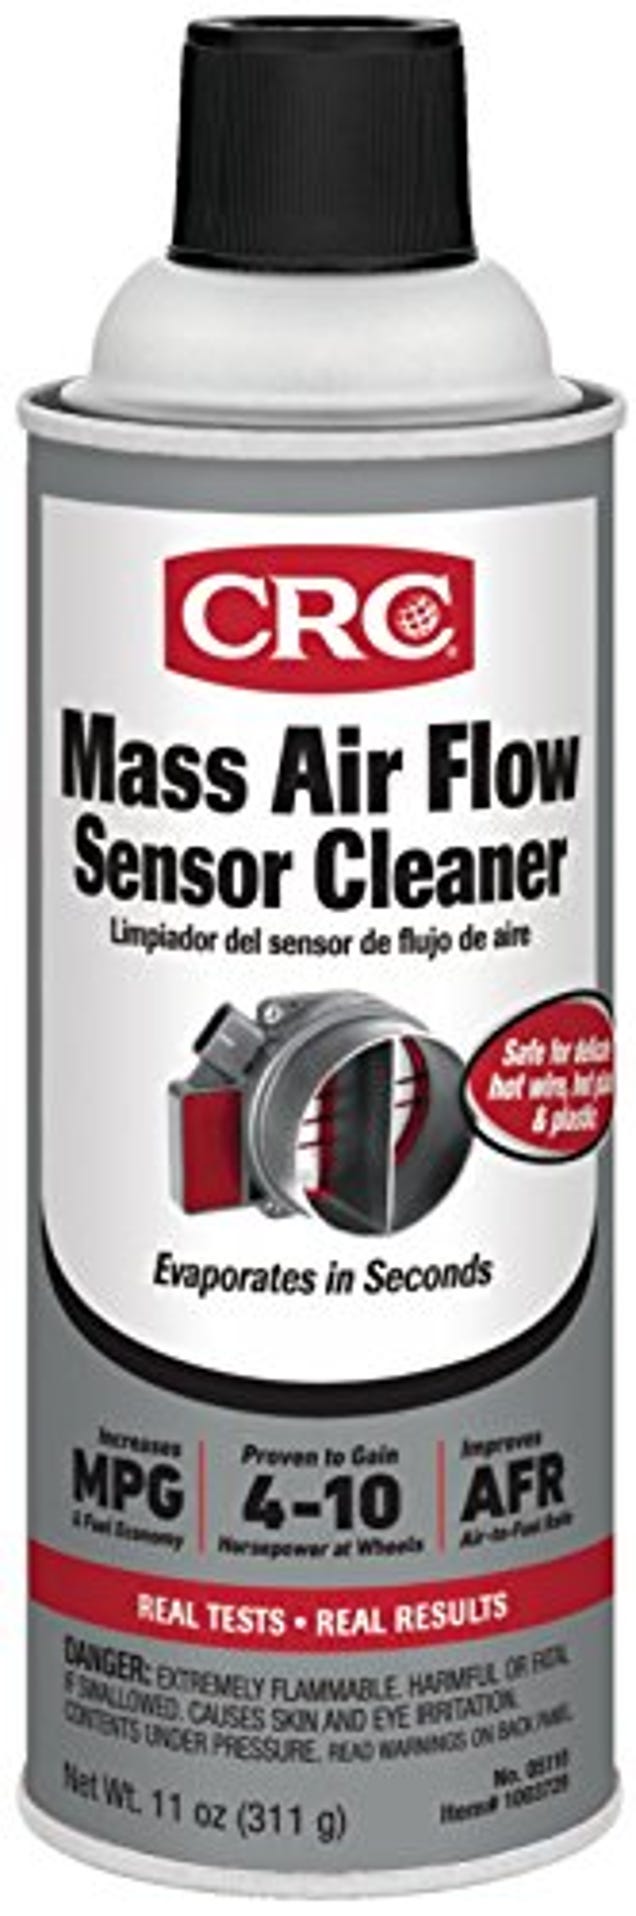 CRC 05110 Mass Air Flow Sensor Cleaner, Now 18% Off